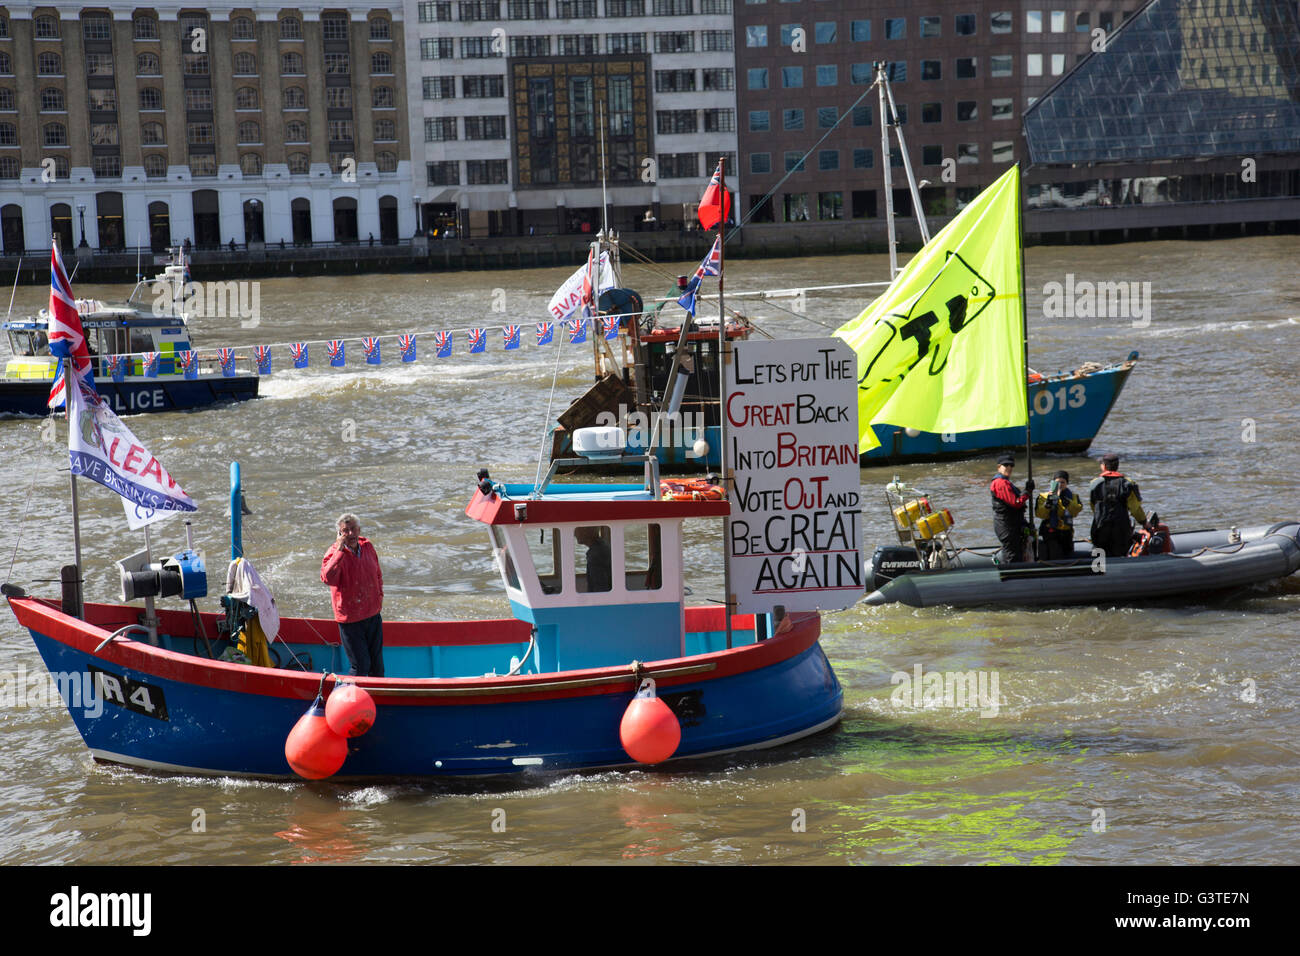 London, UK. 15th June, 2016. Flotilla of fishing vessels heading up the Thames to make the case for Brexit in the EU Referendum on June 15th in London, United Kingdom. The flotilla was organised by Scottish skippers as part of the Fishing for Leave campaign which is against European regulation of the fishing industry, and the CFP Common Fisheries Policy. Between 30 and 35 trawlers travelled up the Thames, through Tower Bridge and moored in the Pool of London. Stock Photo